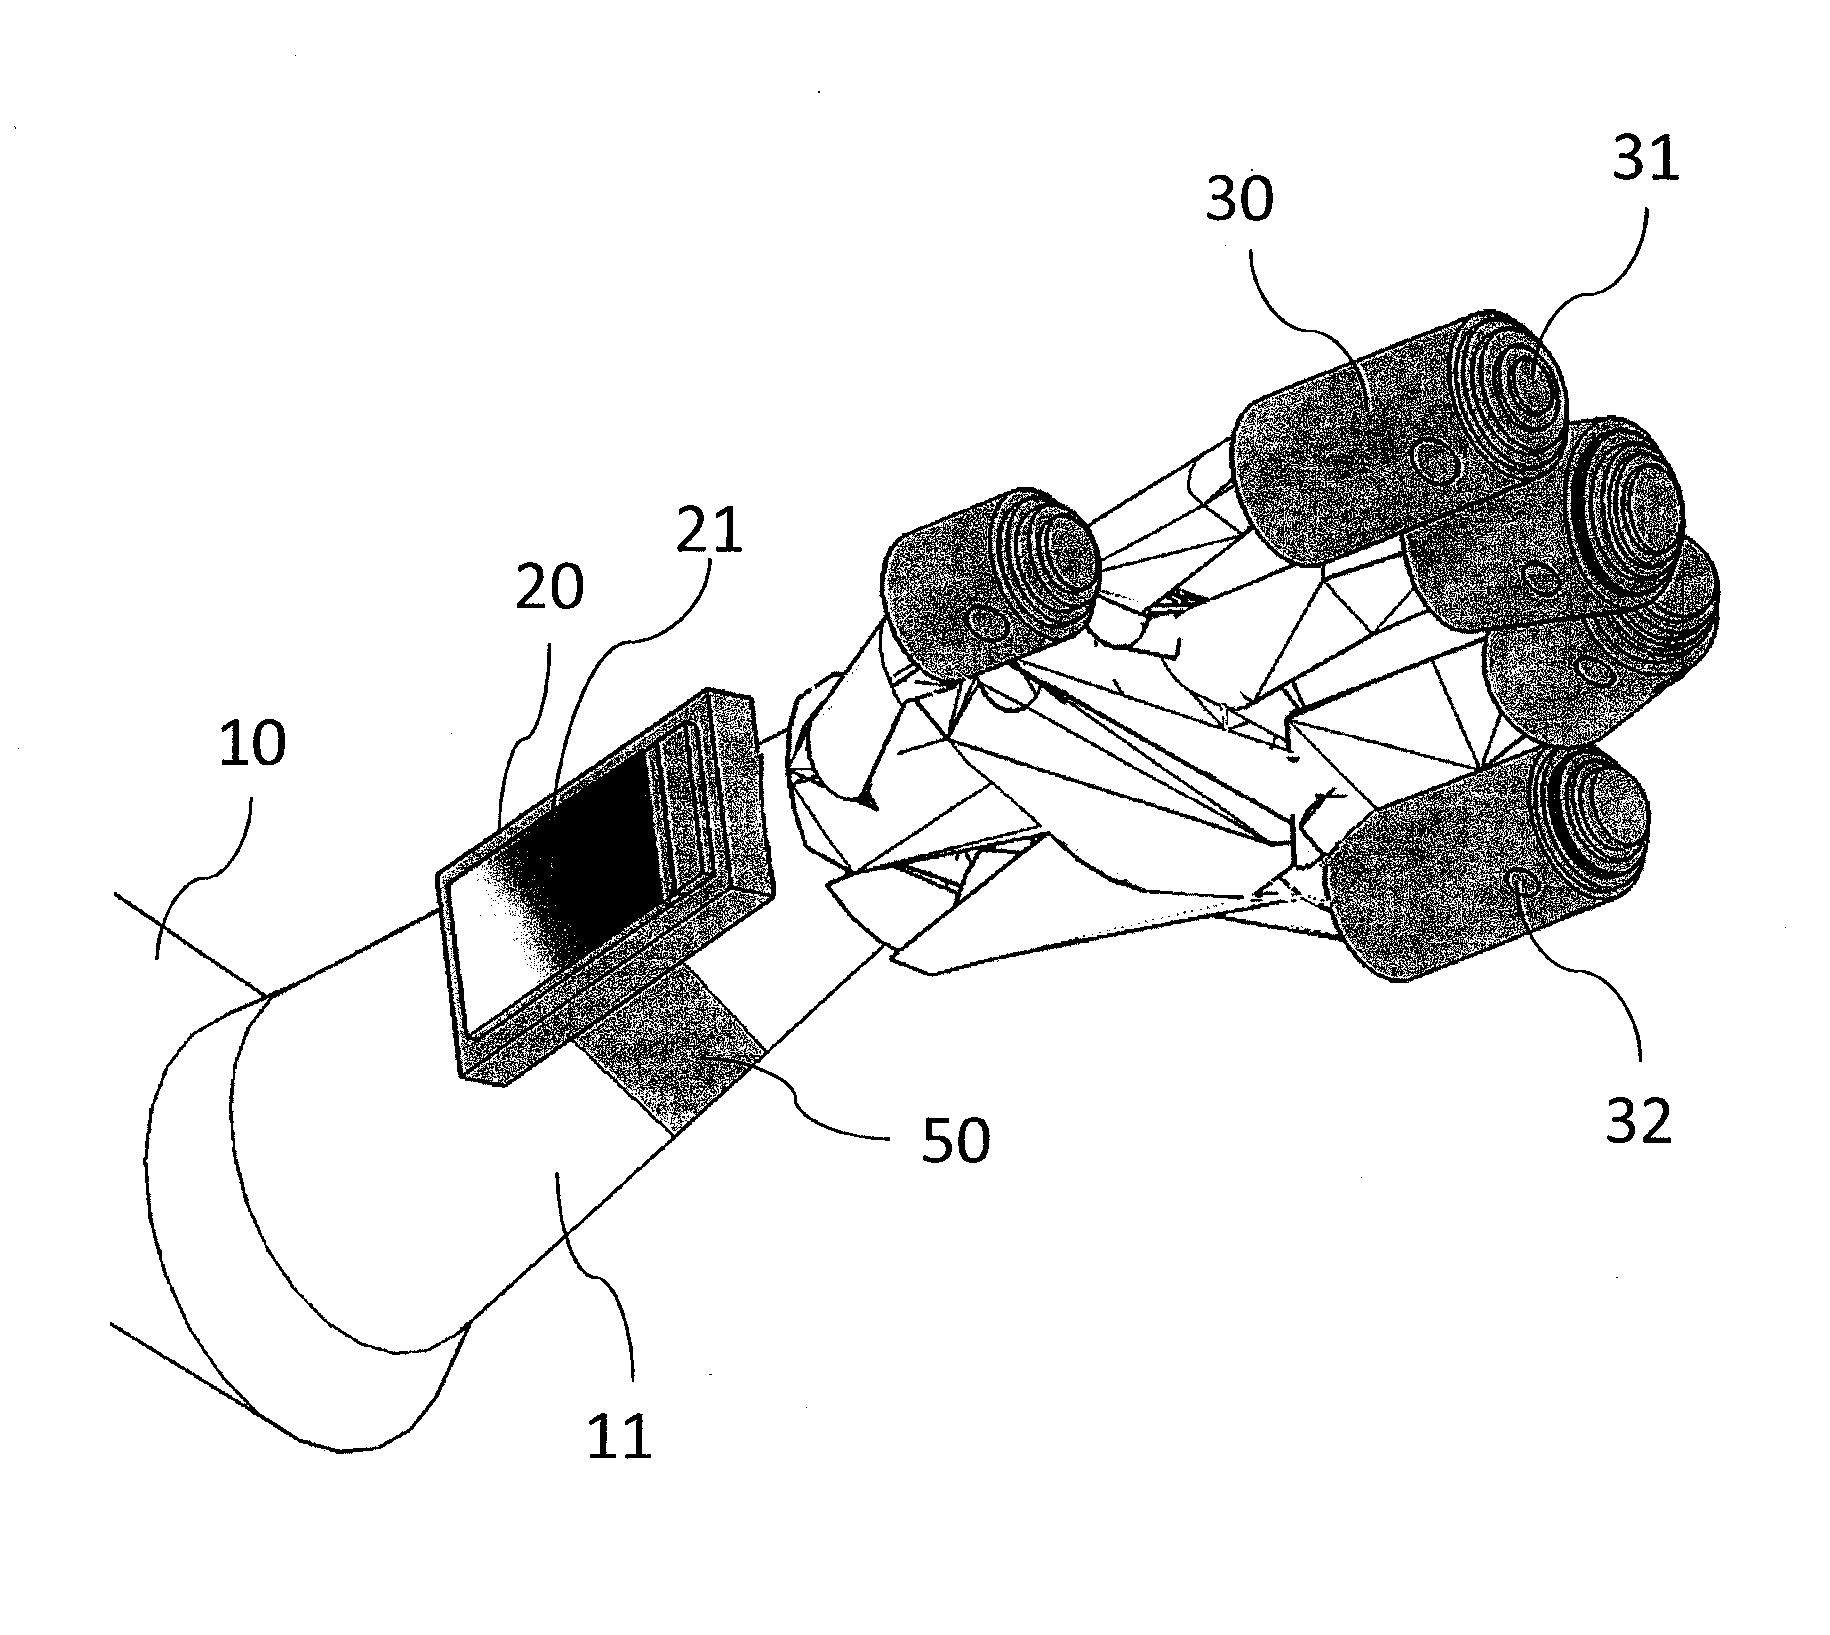 System and method for providing a prosthetic device with non-tactile sensory feedback